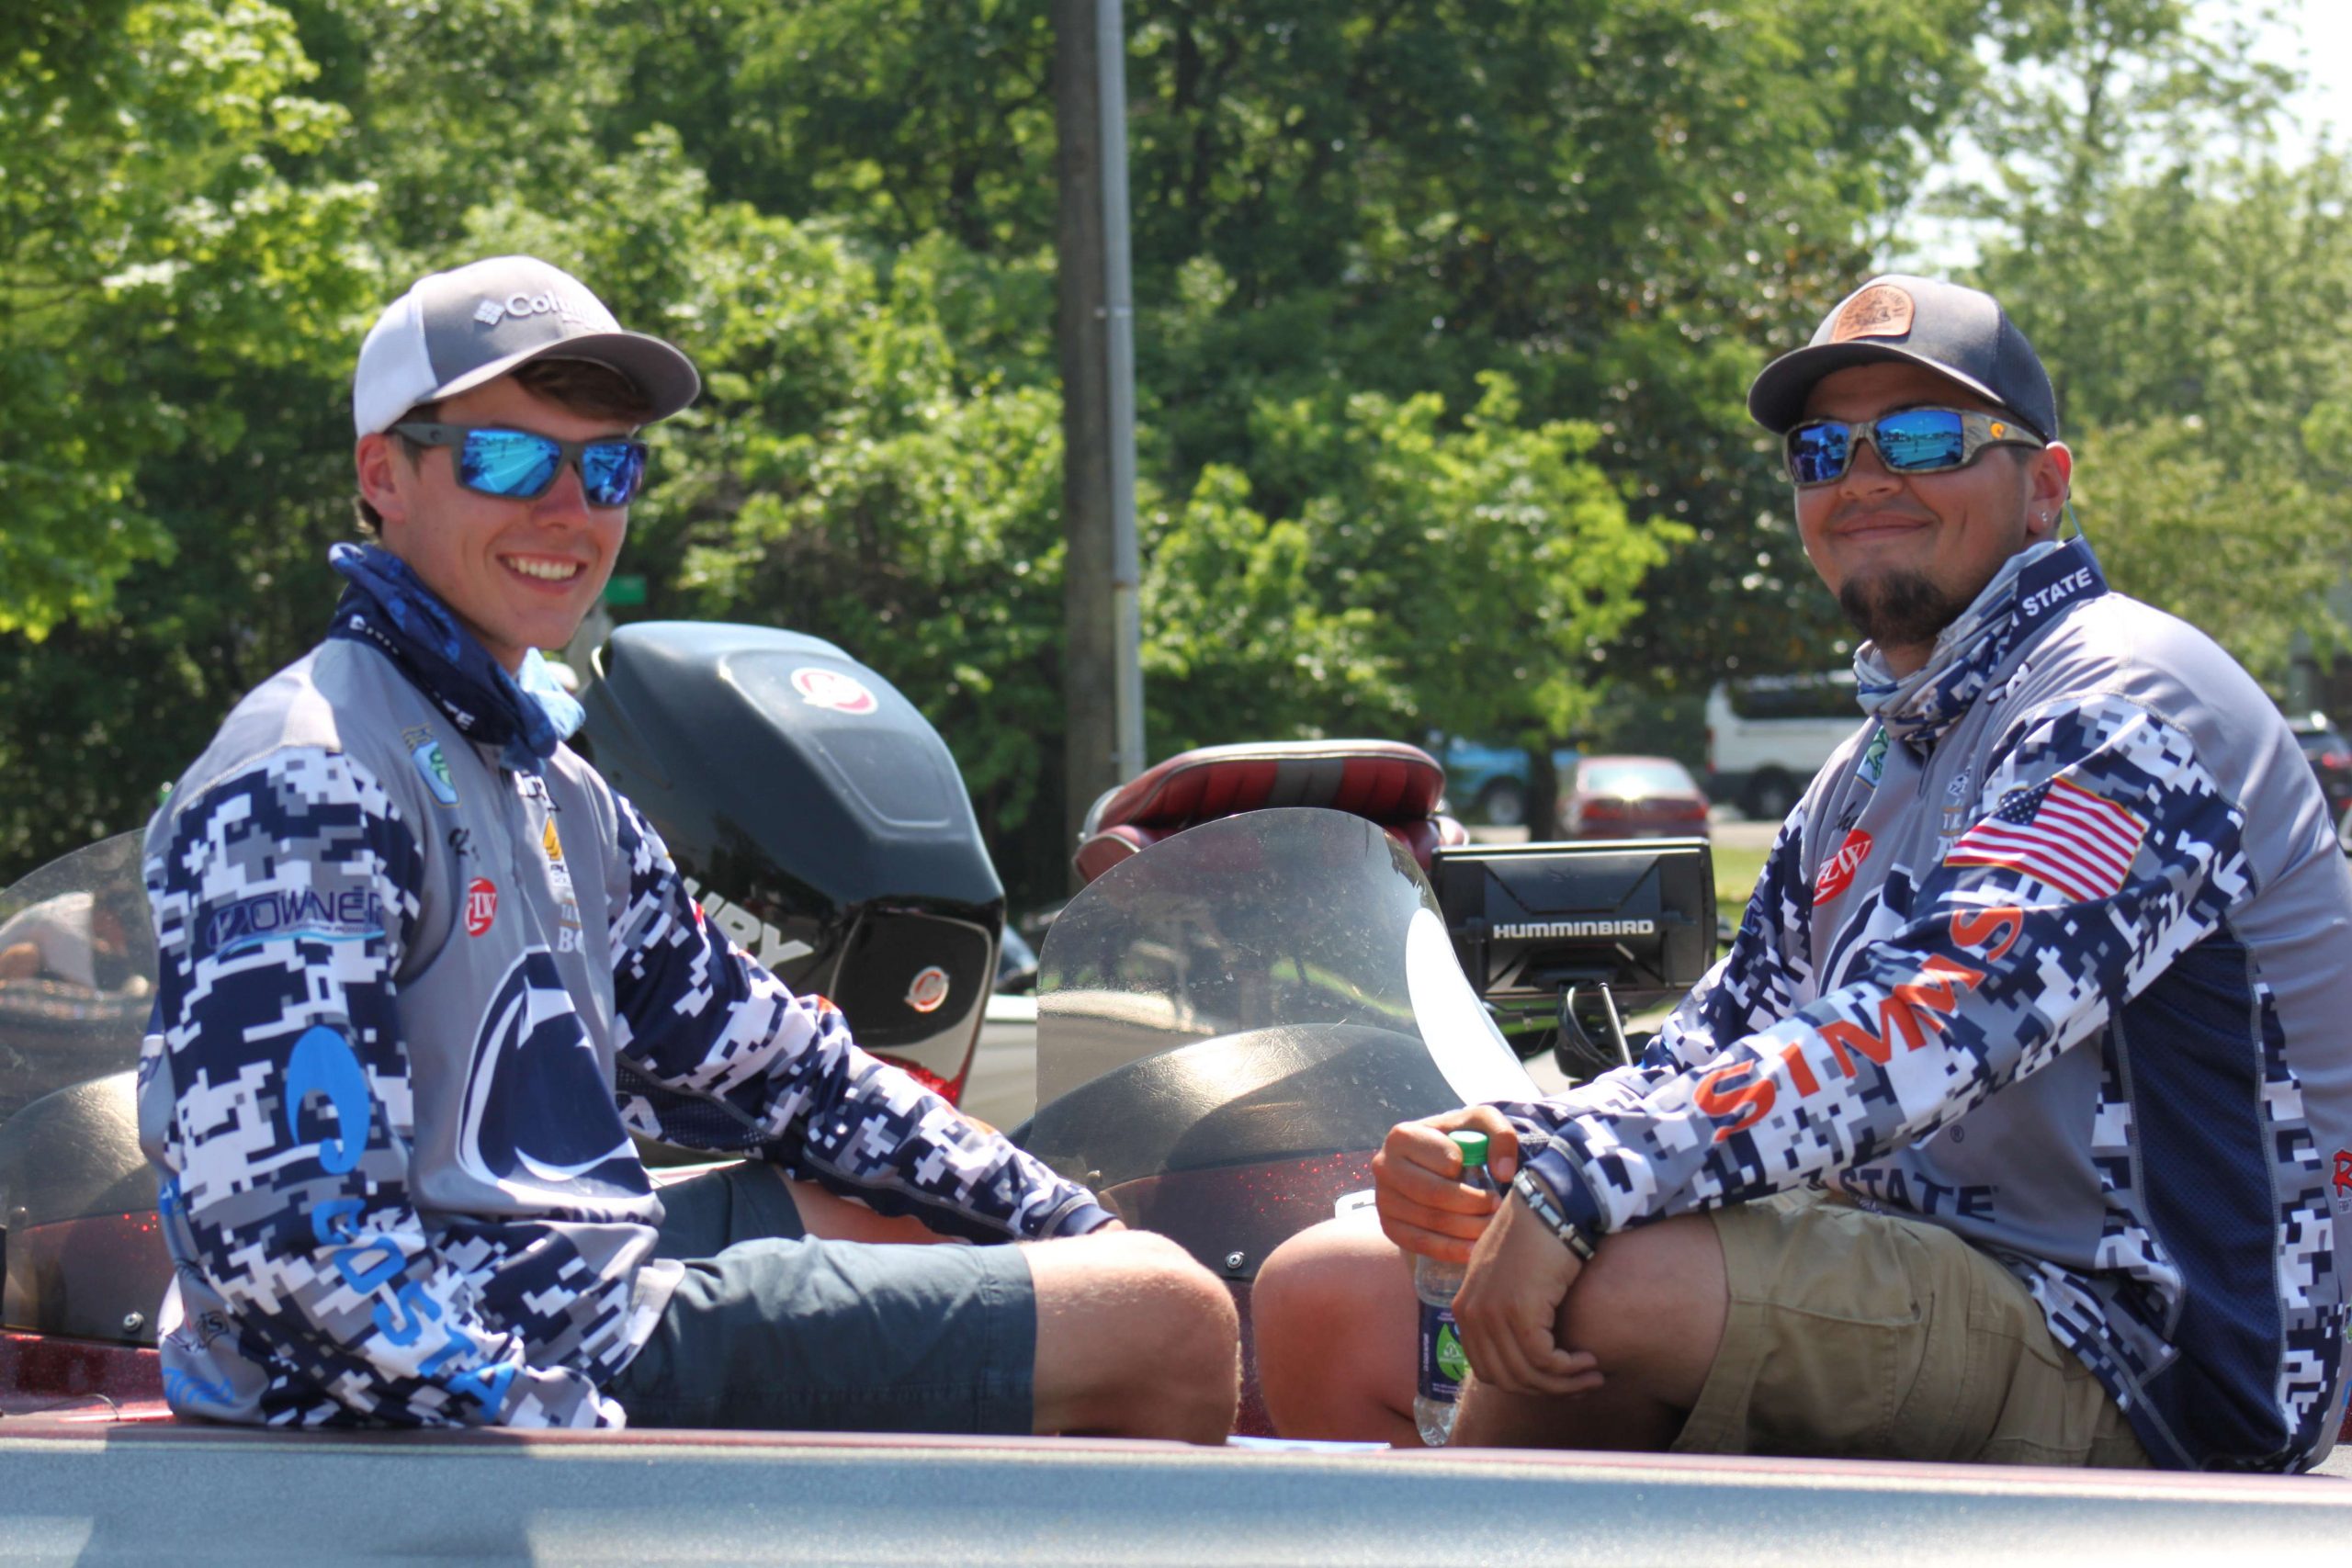 Thereâs Stephen Jesso and Ryan Fox of Penn State taking a breather after a long, hot day on Cherokee Lake.